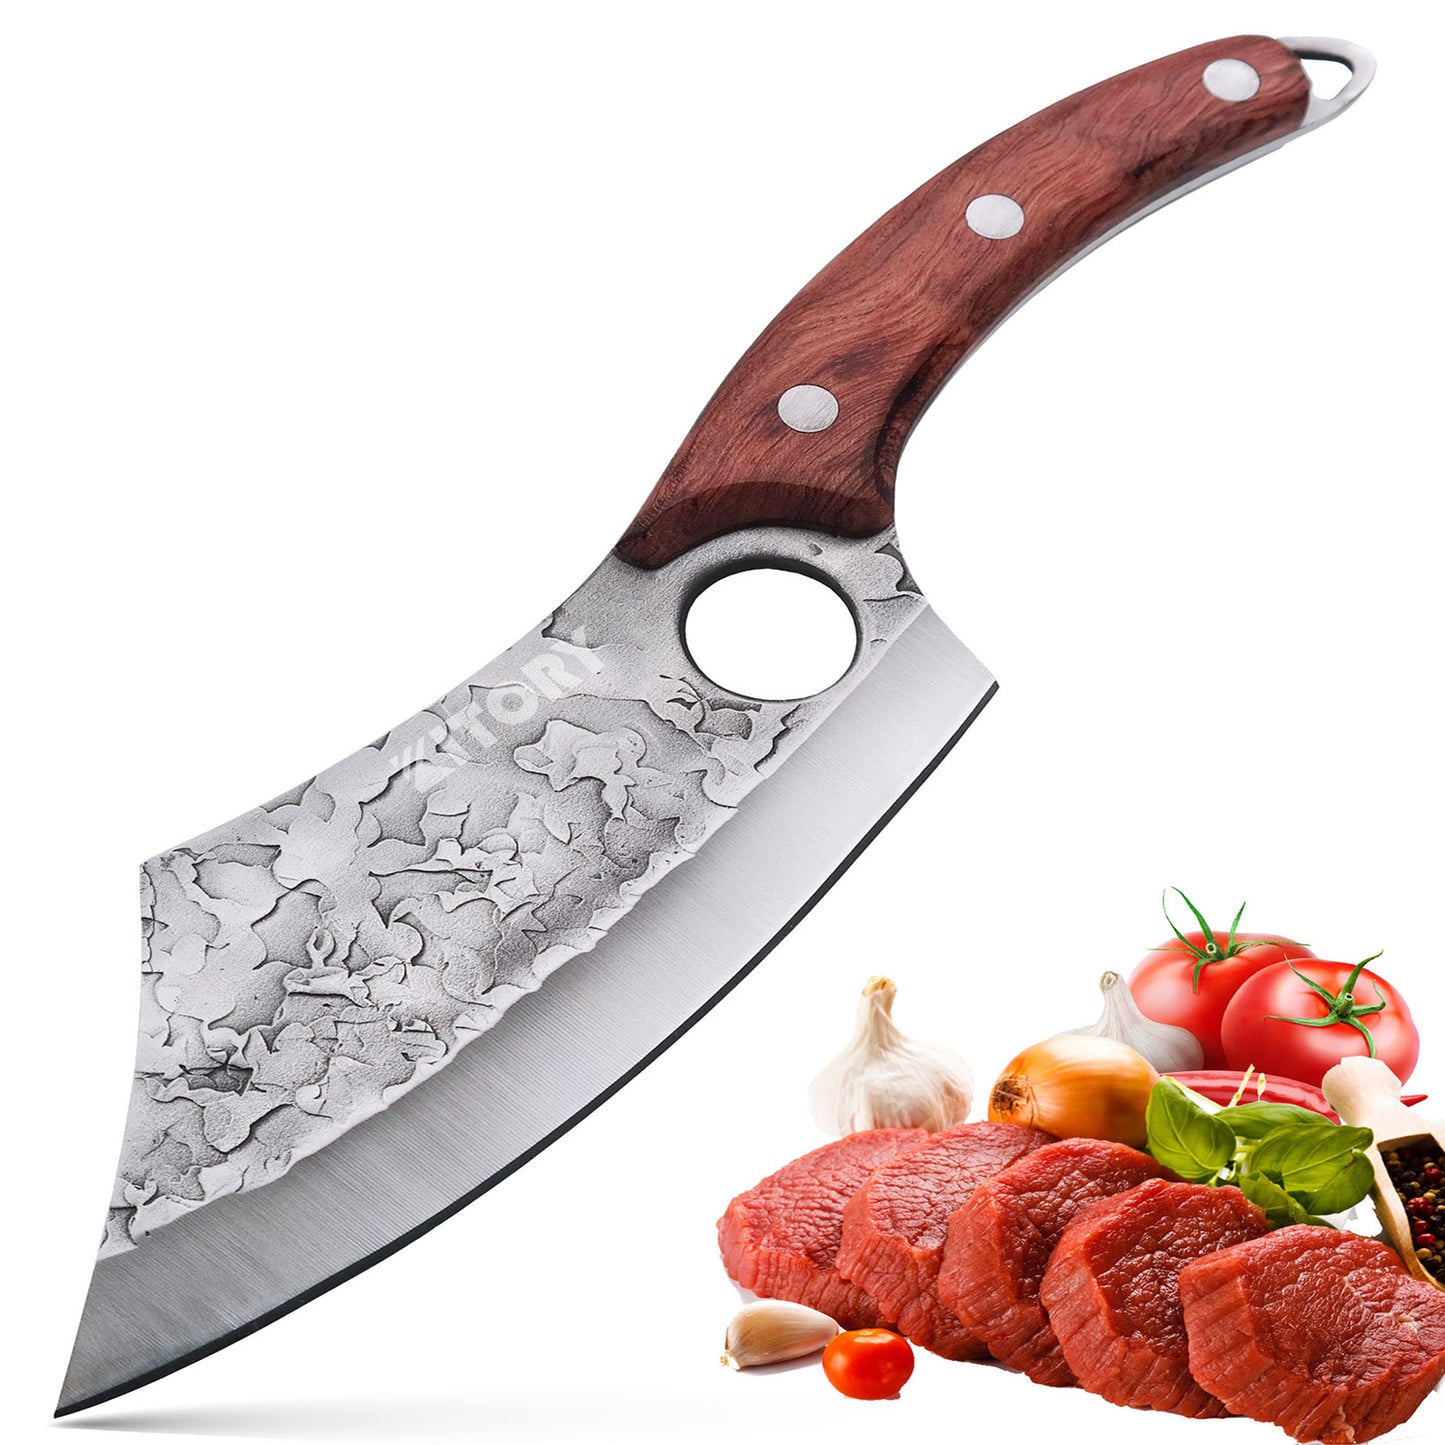 Kitory Sharp Butcher Boning Knife 7 Inch With Pearwood Handle